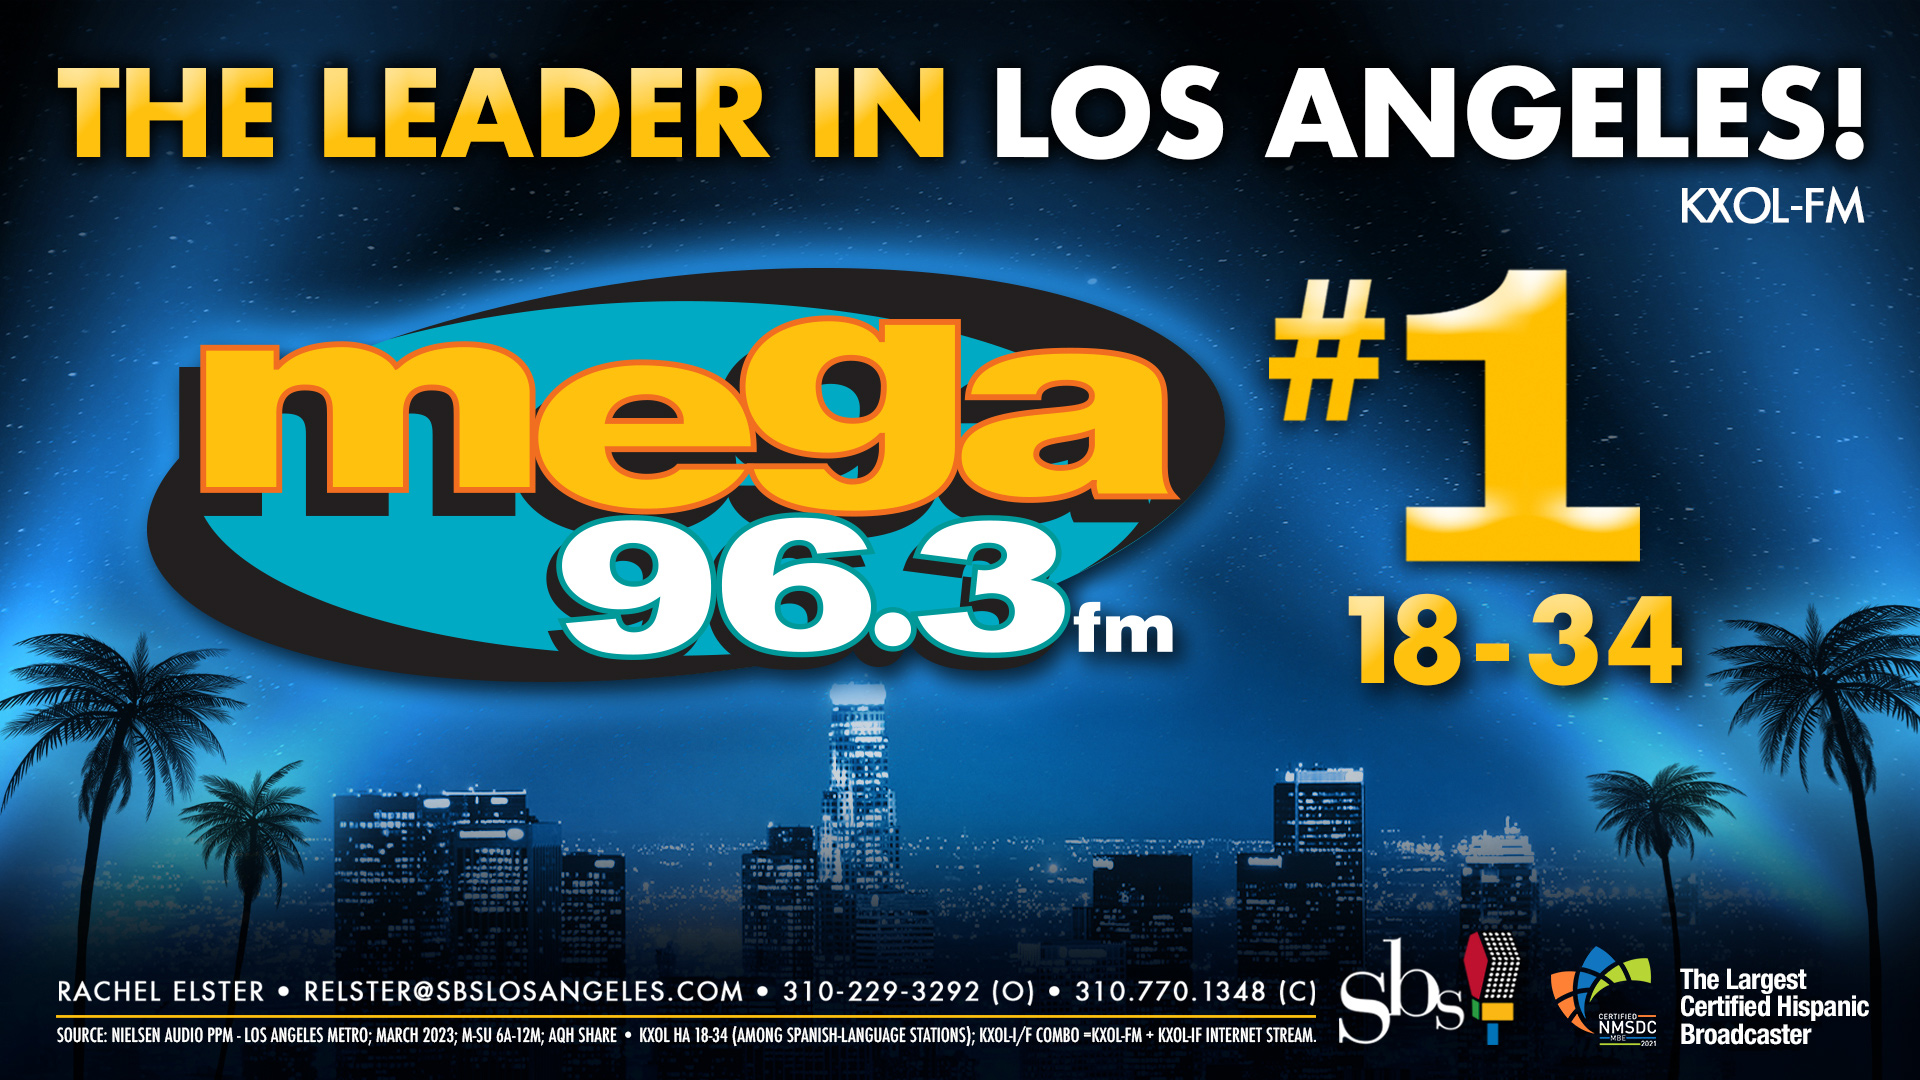 #1 KXOL - The leader in Los Angeles!